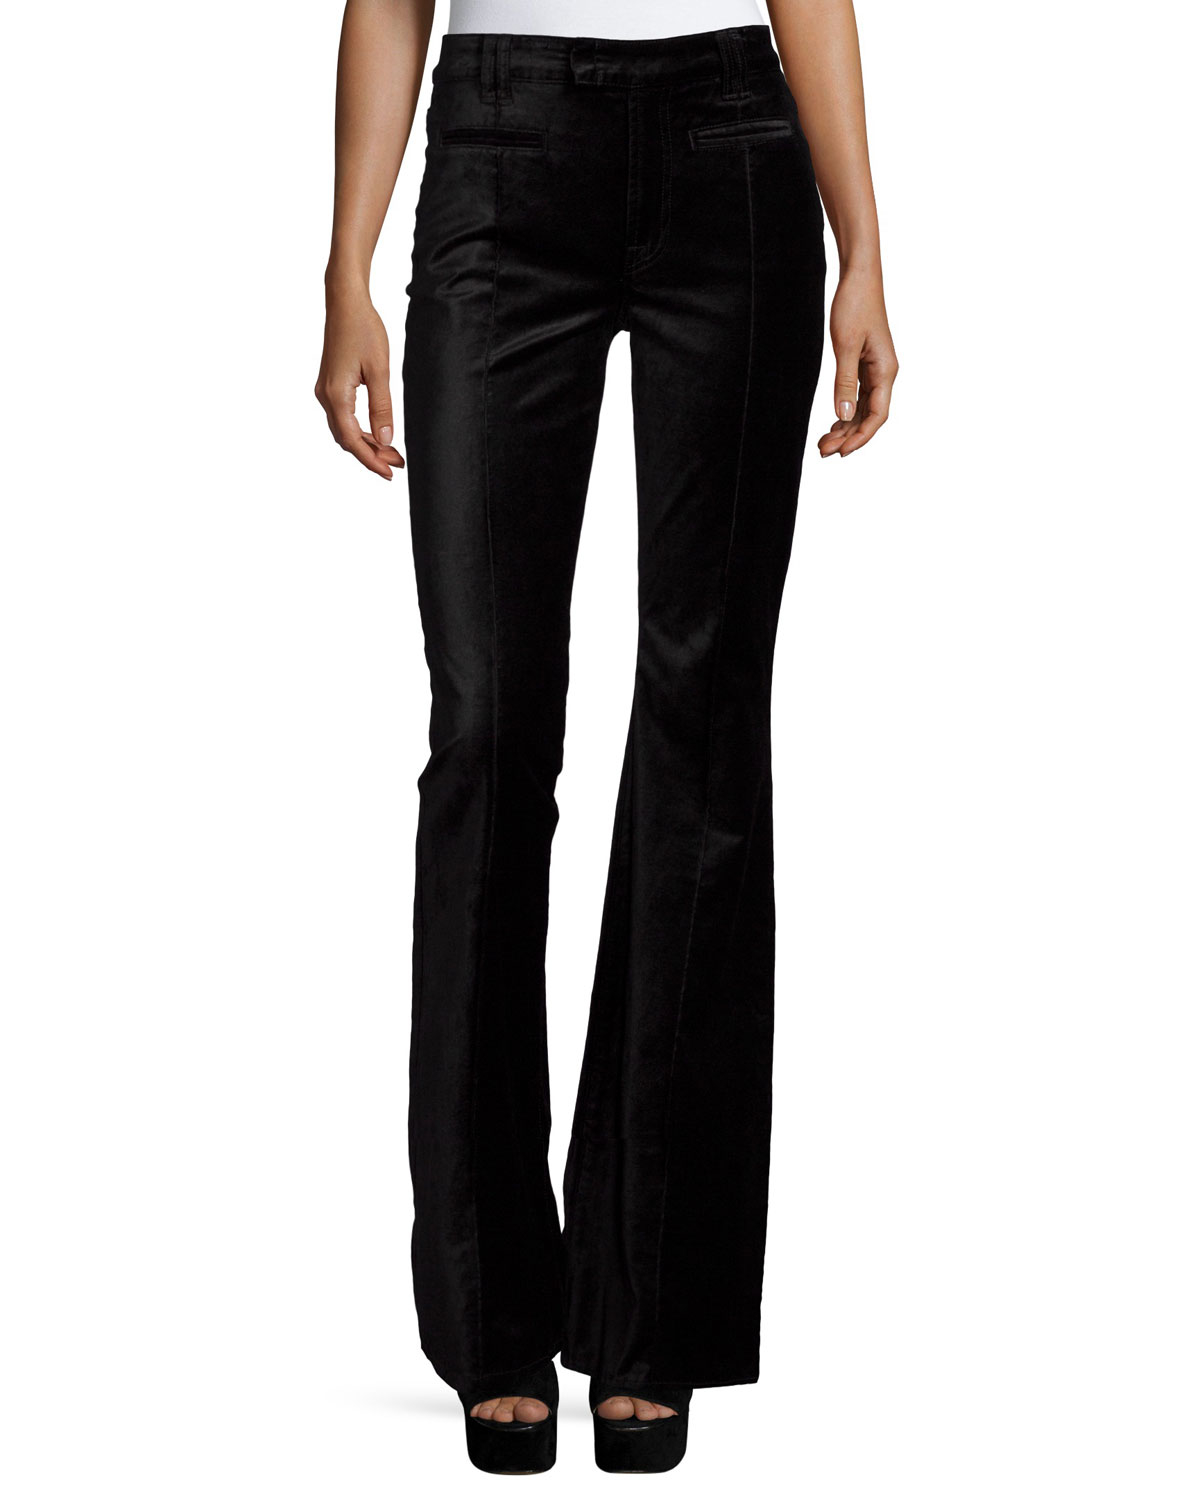 Lyst - 7 For All Mankind The Pintuck Flare-leg Trousers in Black